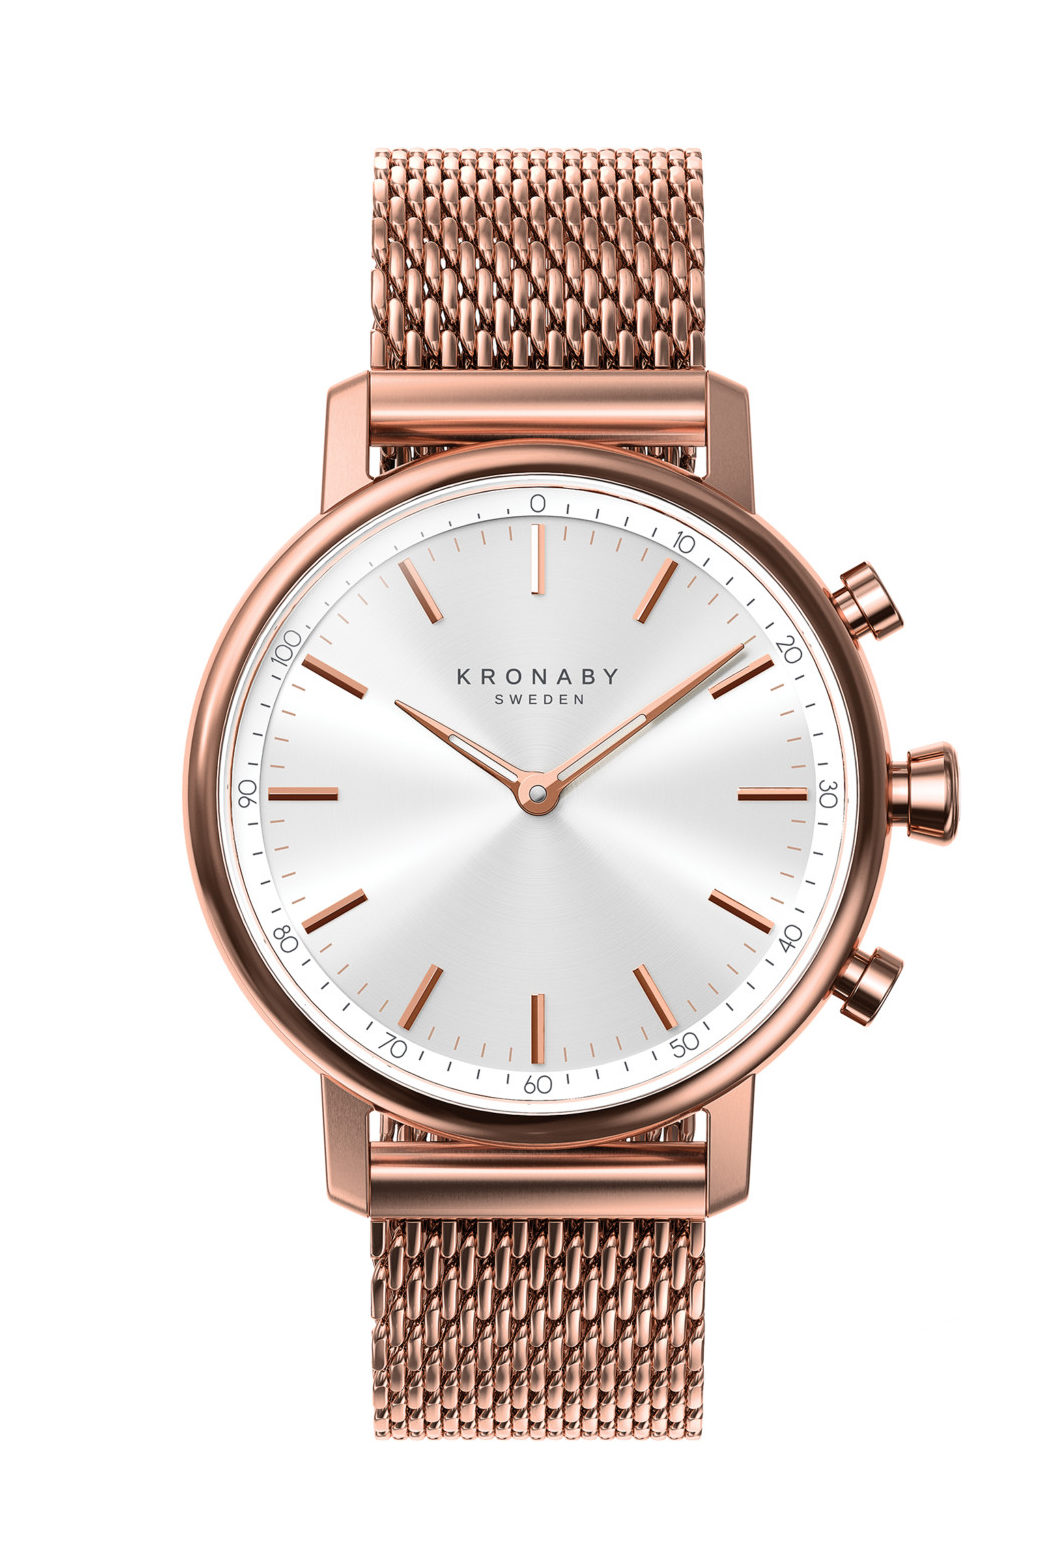 The carat family expresses scandinavian refinement and elegance and is made of carefully selected premium materials and finishes that kronaby has chosen to match an effortless sense of style. The case size is 38mm and the model comes in six different variants with 18mm bracelets in stainless steel, solid links/mesh or leather.